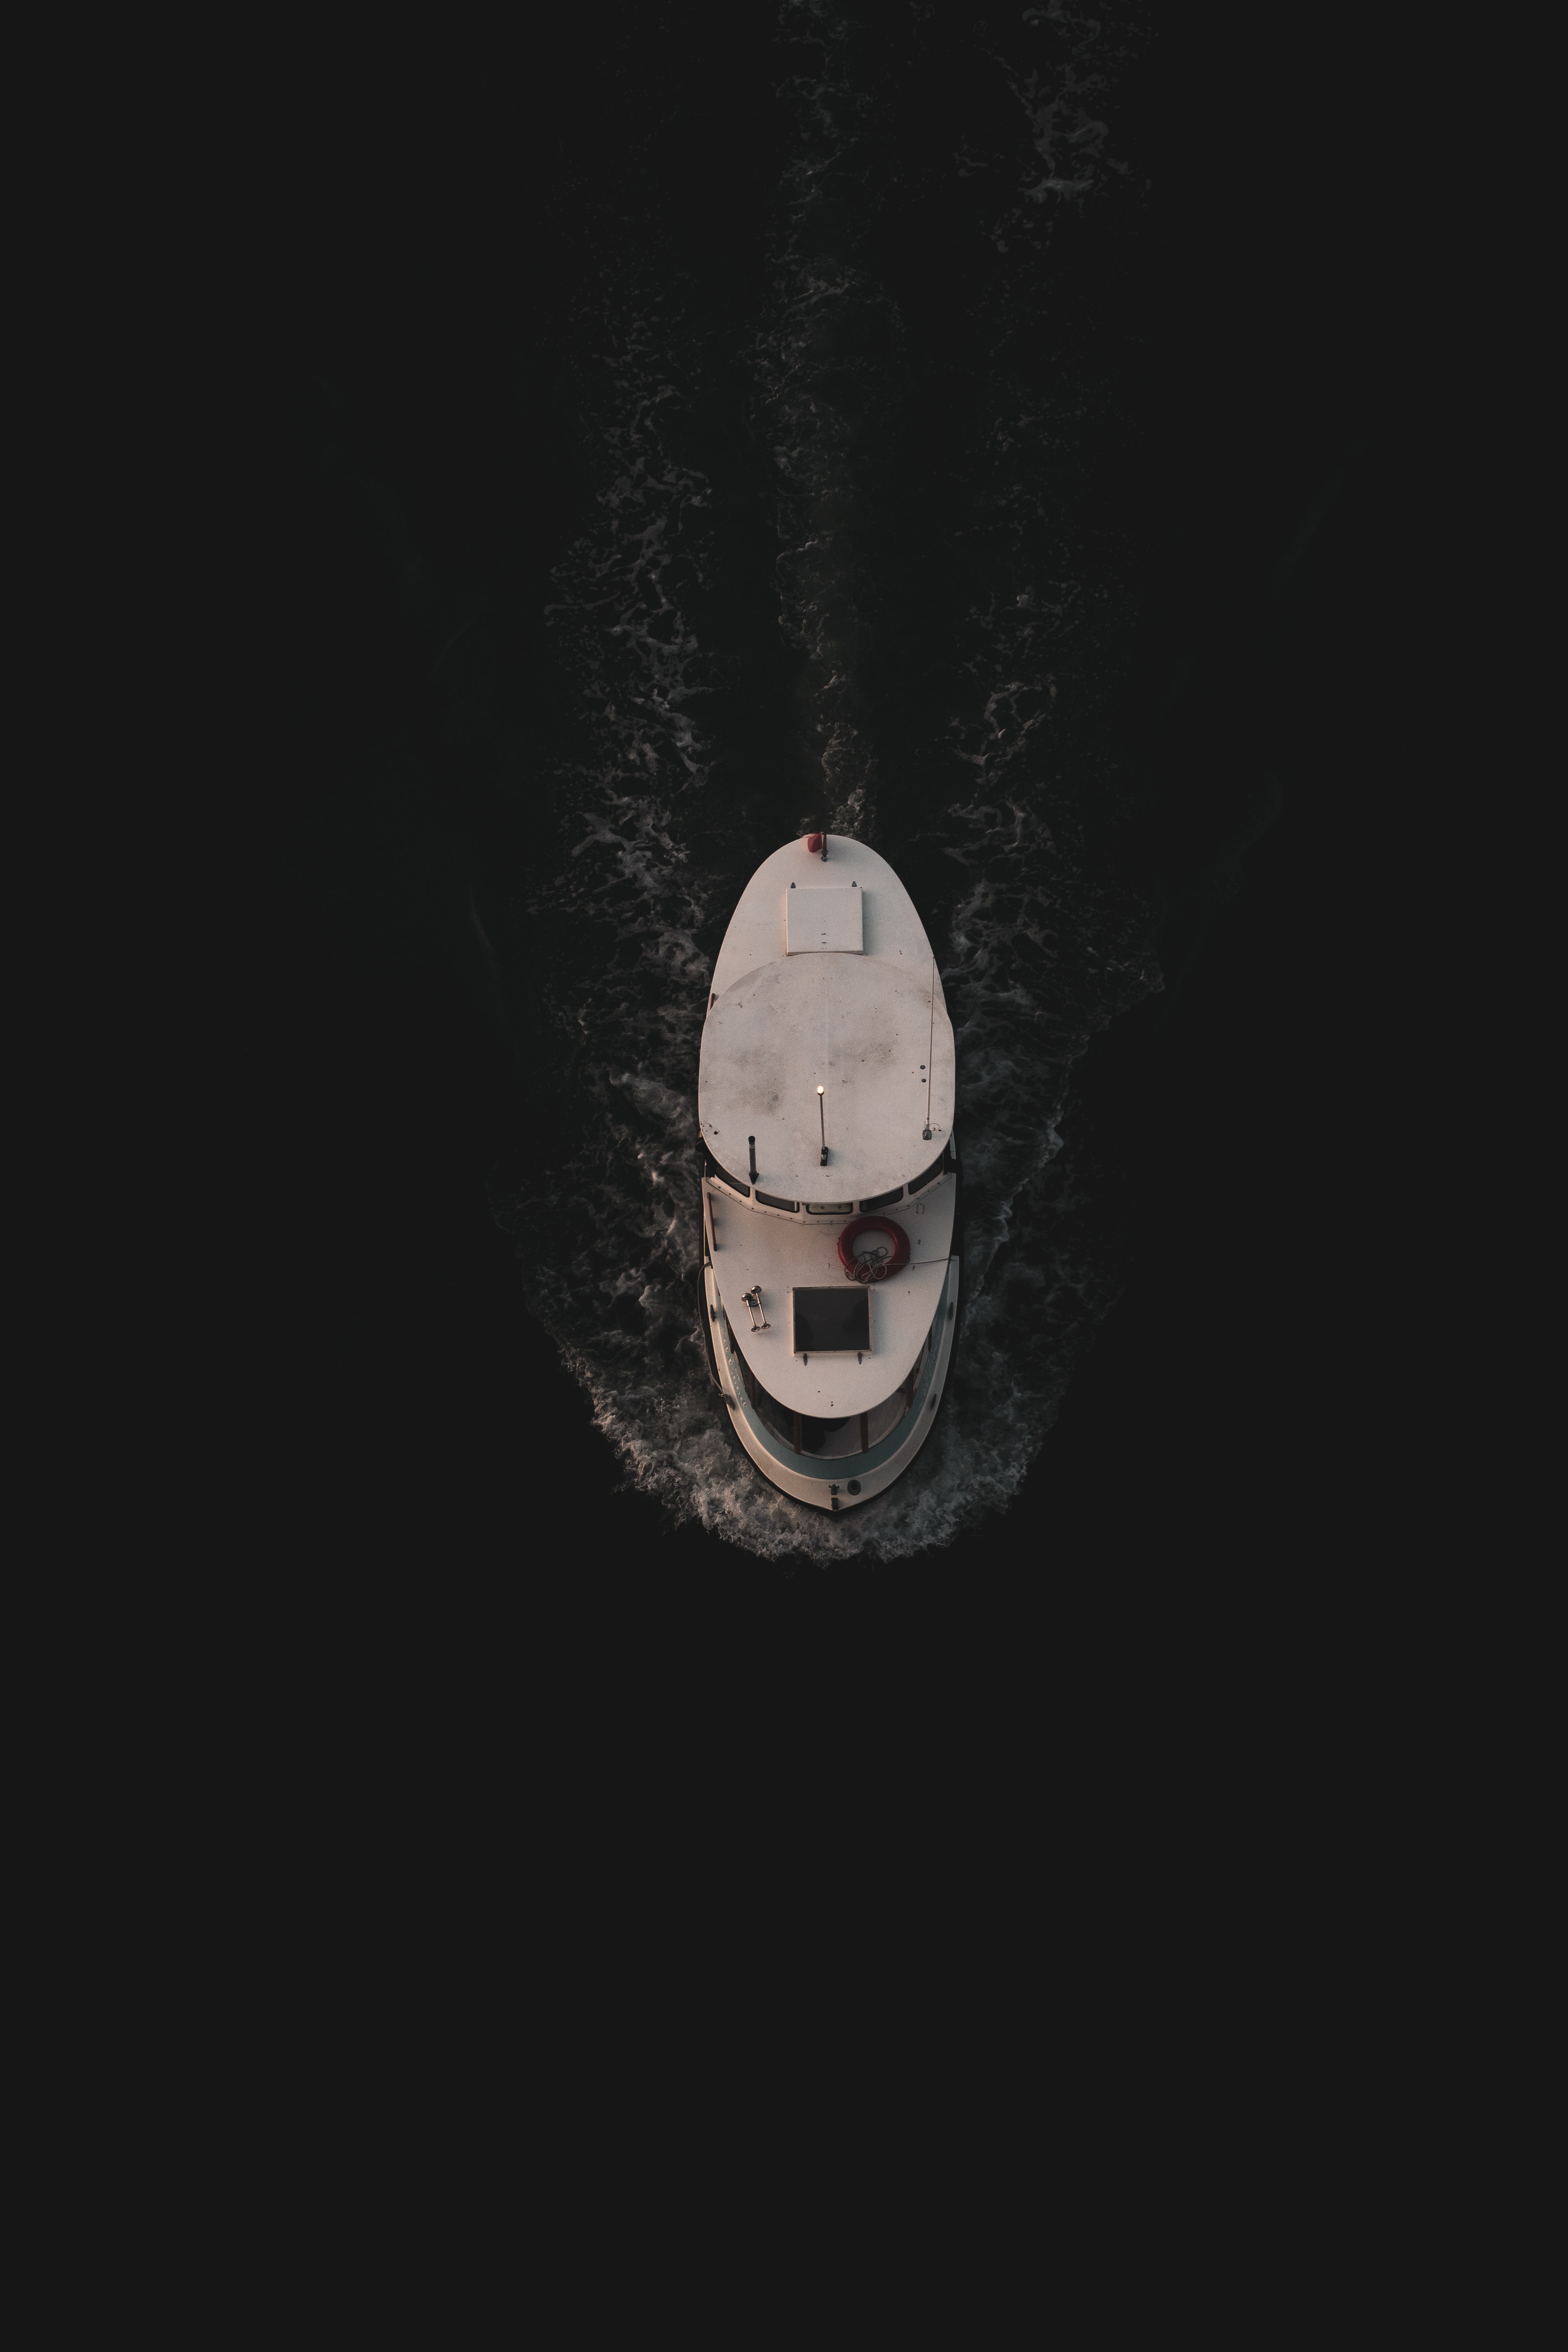 boat, water, view from above, miscellanea, miscellaneous